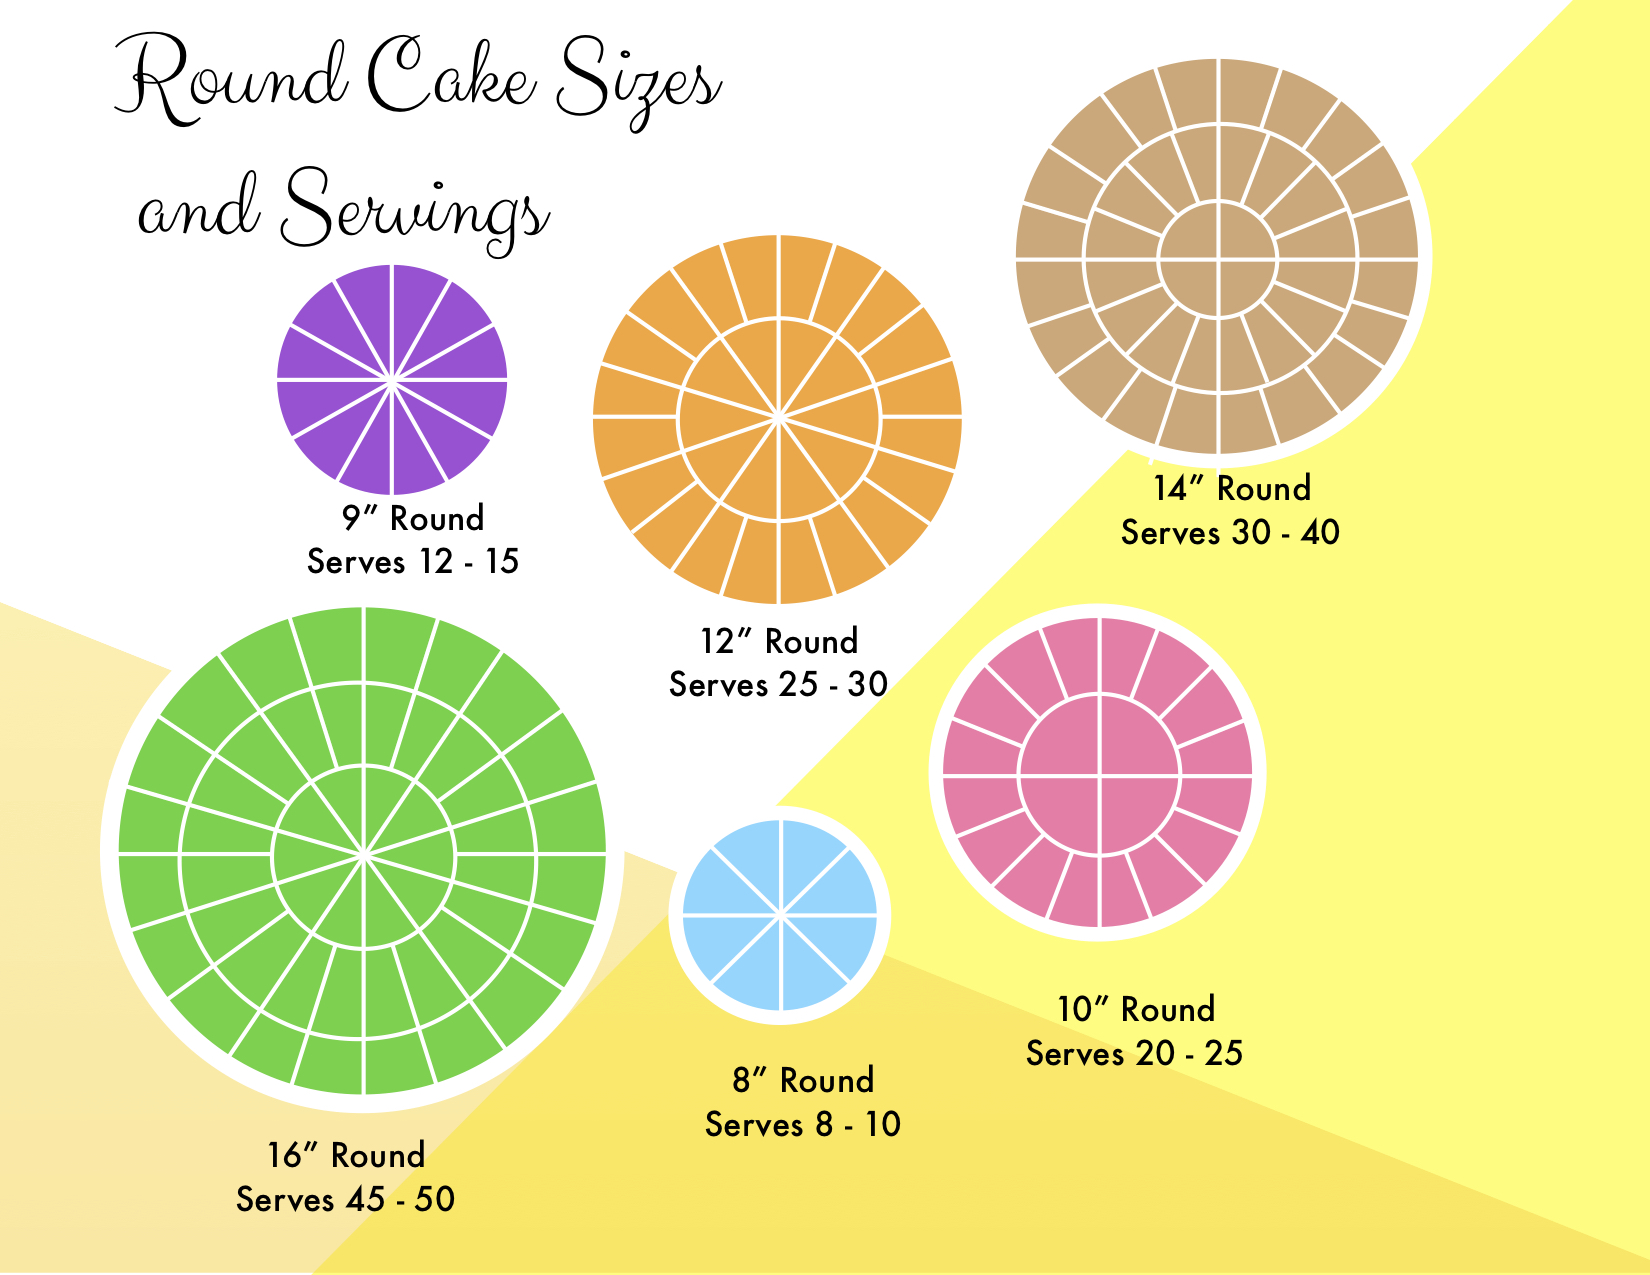 Round Cake Size Chart for Website